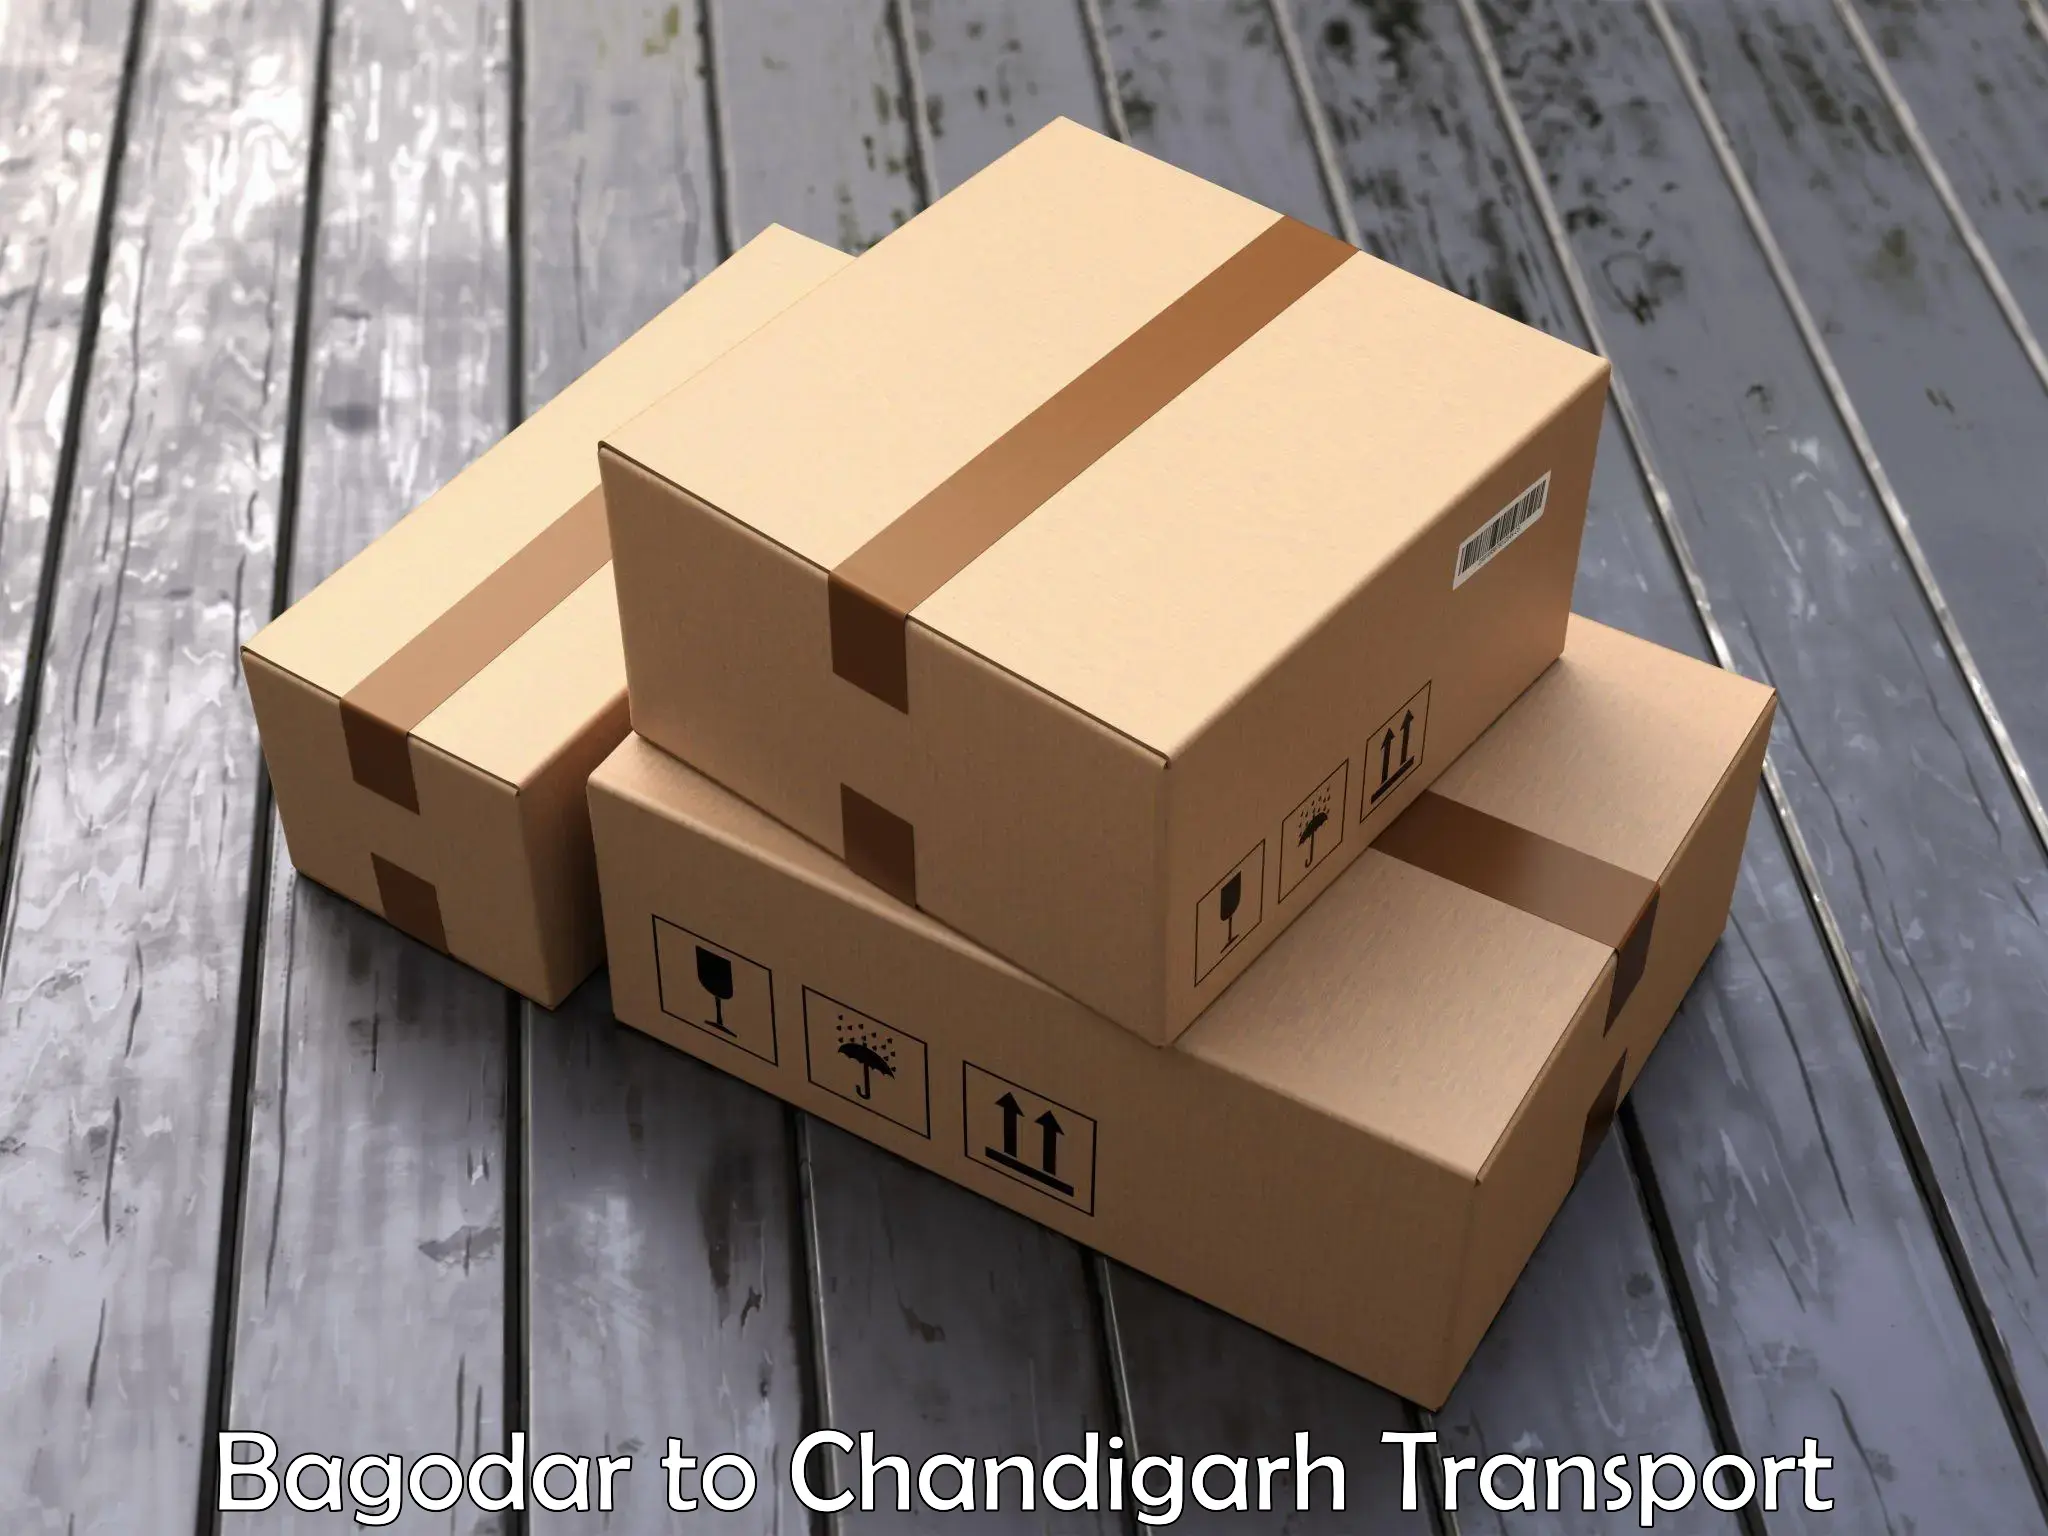 Goods delivery service Bagodar to Chandigarh